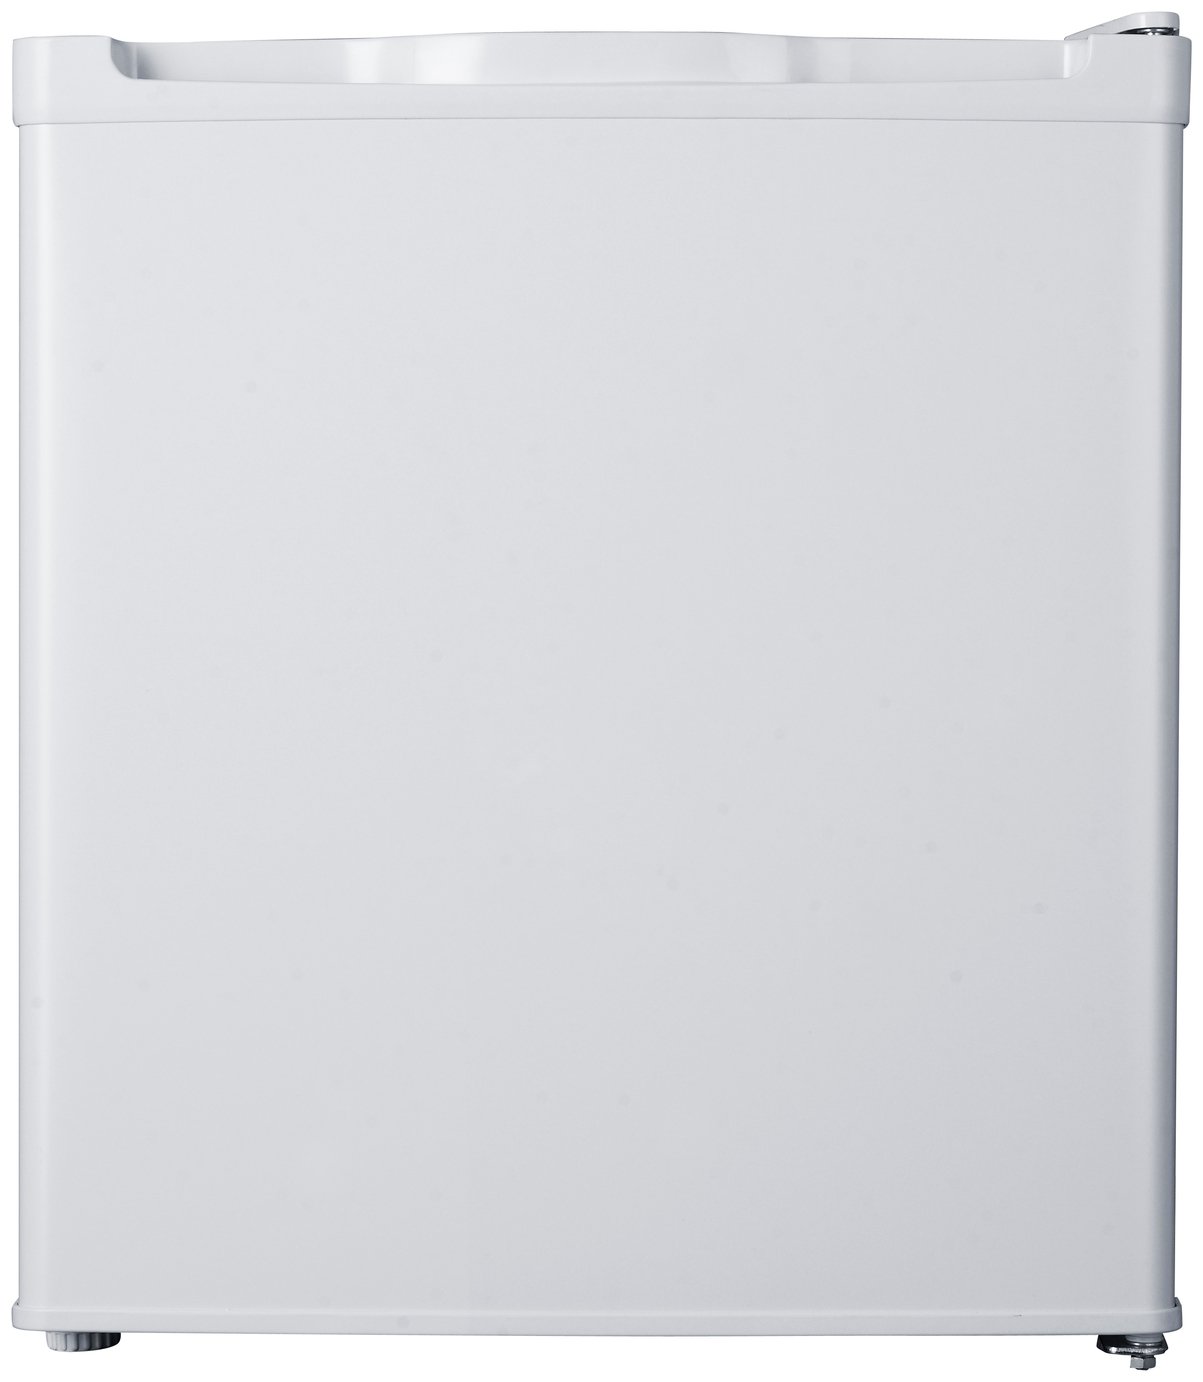 Simple Value DD1-05 Table Top Freezer - White